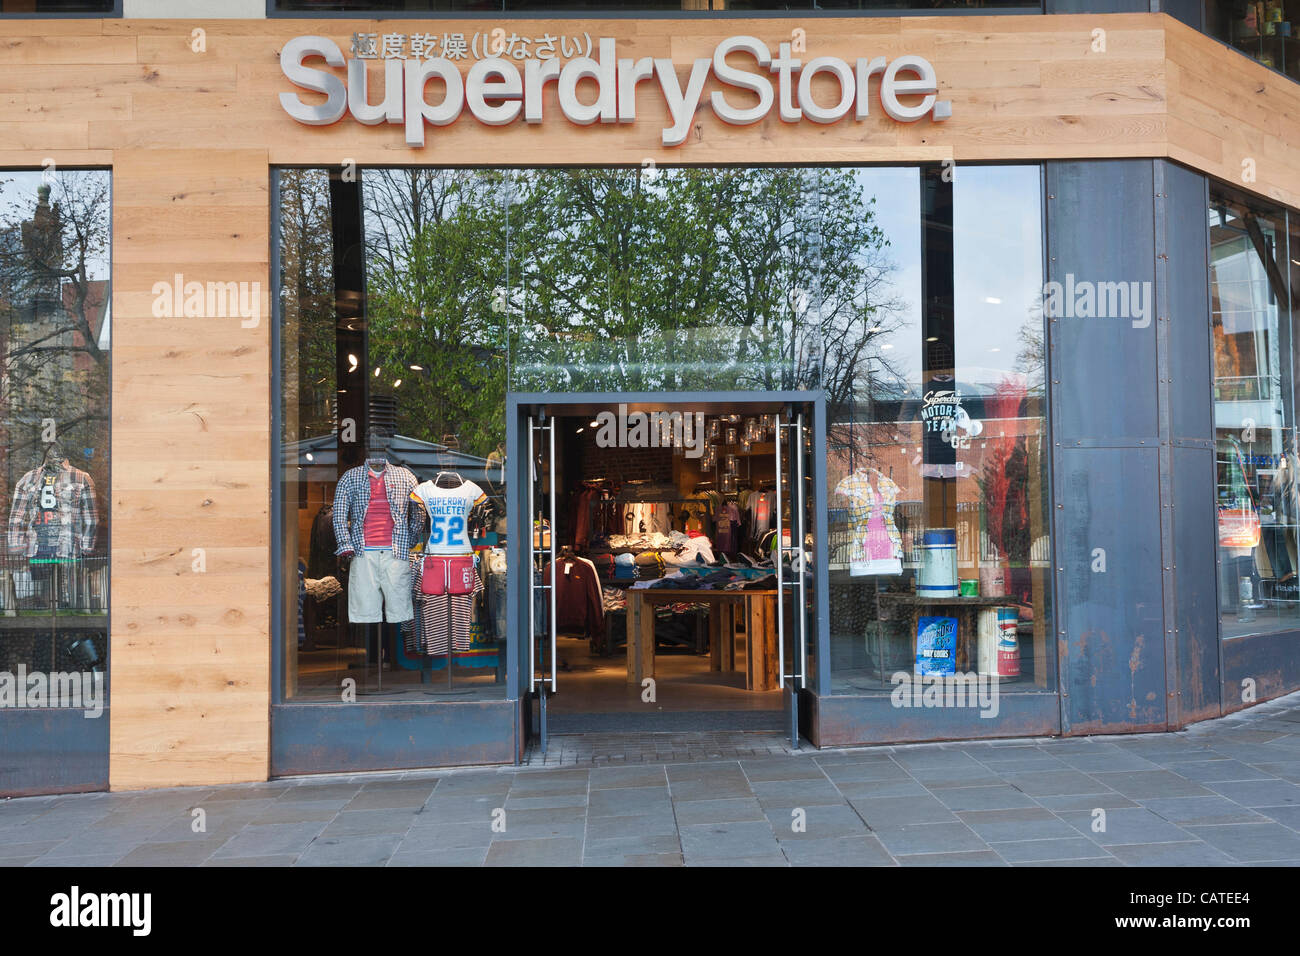 20/4/12, Superdry clothing store in Norwich, UK. Clothing chain SuperGroup  stunned investors today by admitting it had got its sums wrong when  forecasting its performance. The Superdry owner warned that profits will